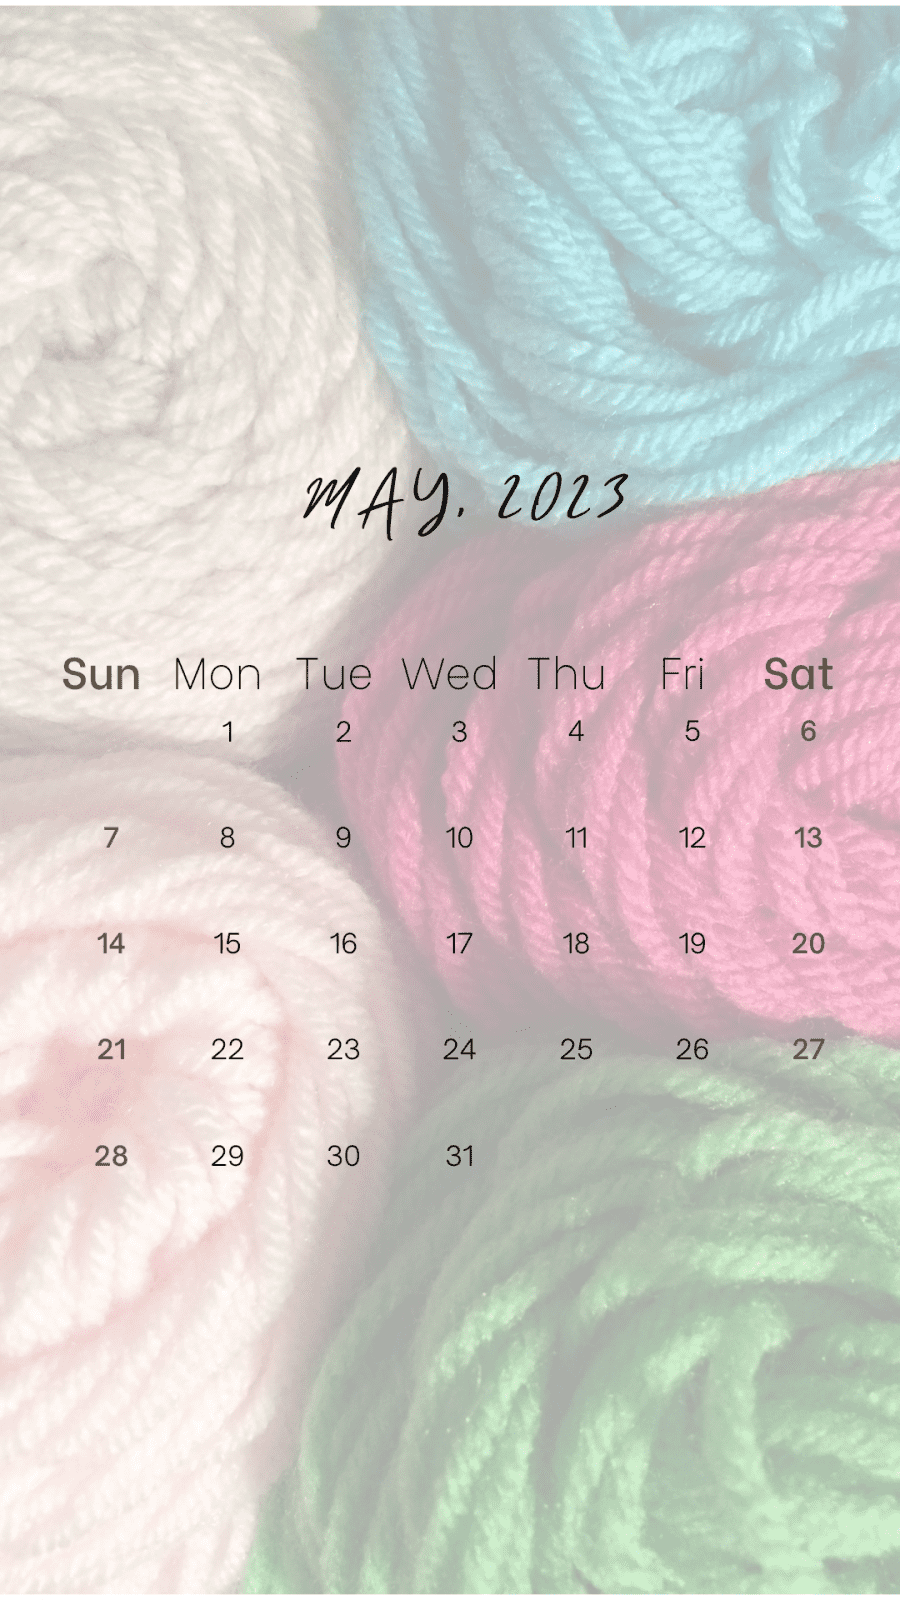 May 2023 calendar over pink and green yarn skeins.